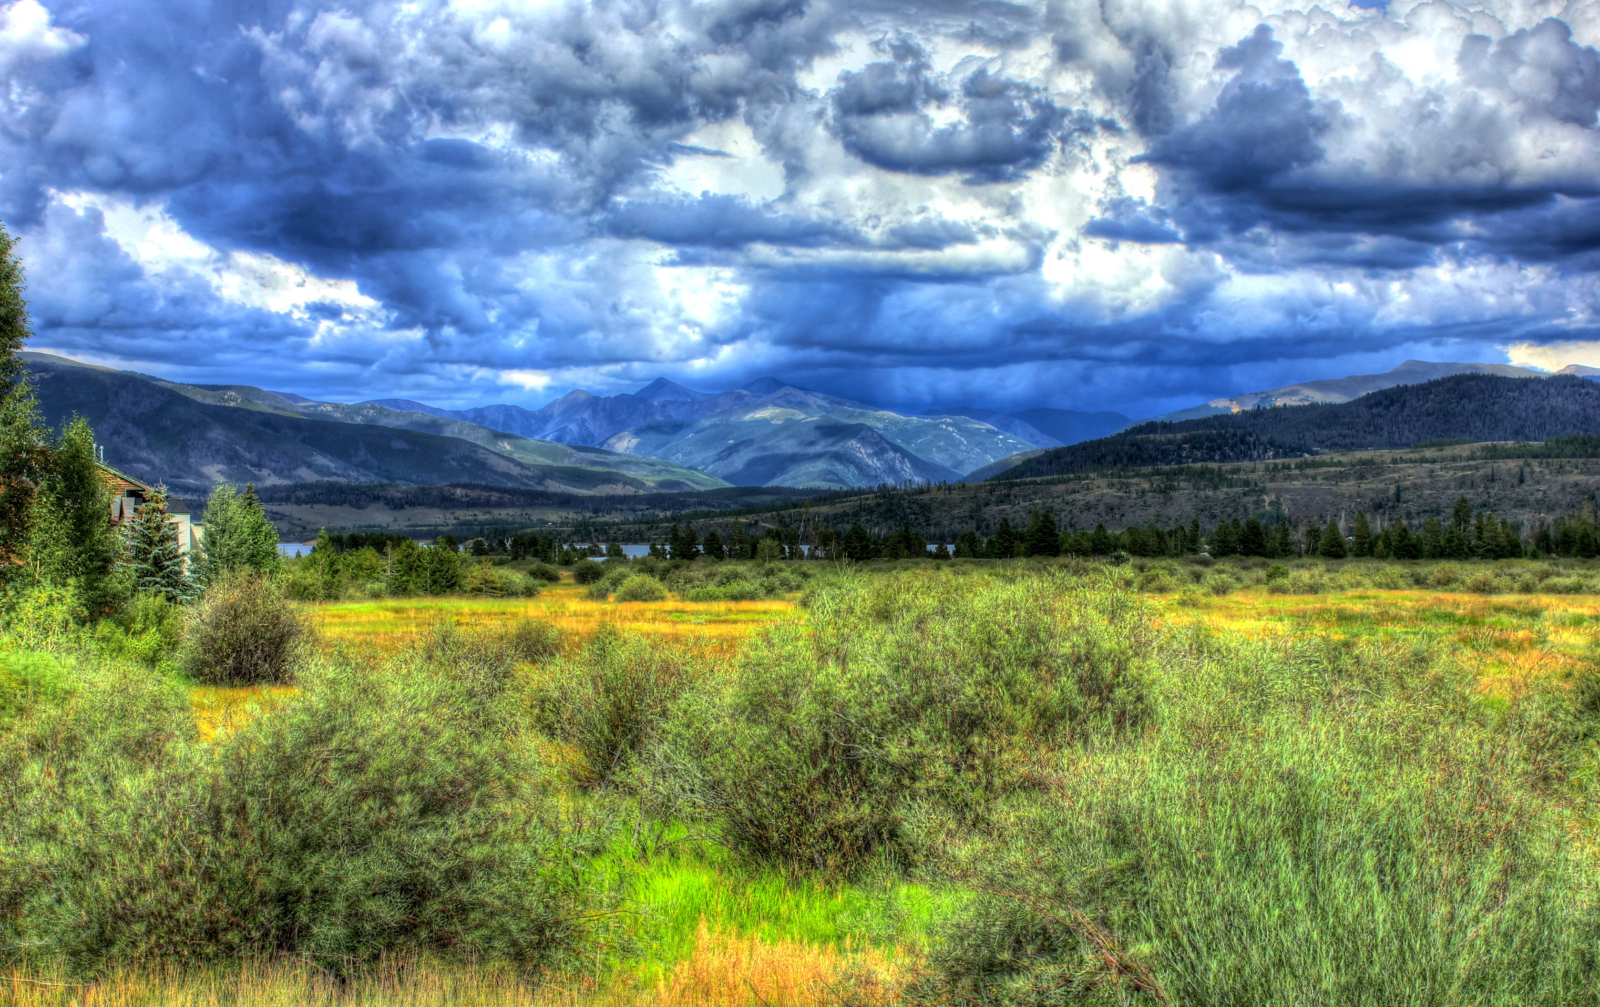 View of a KODI Rafting destination landscape with a green field, mountains, and cloudy sky.